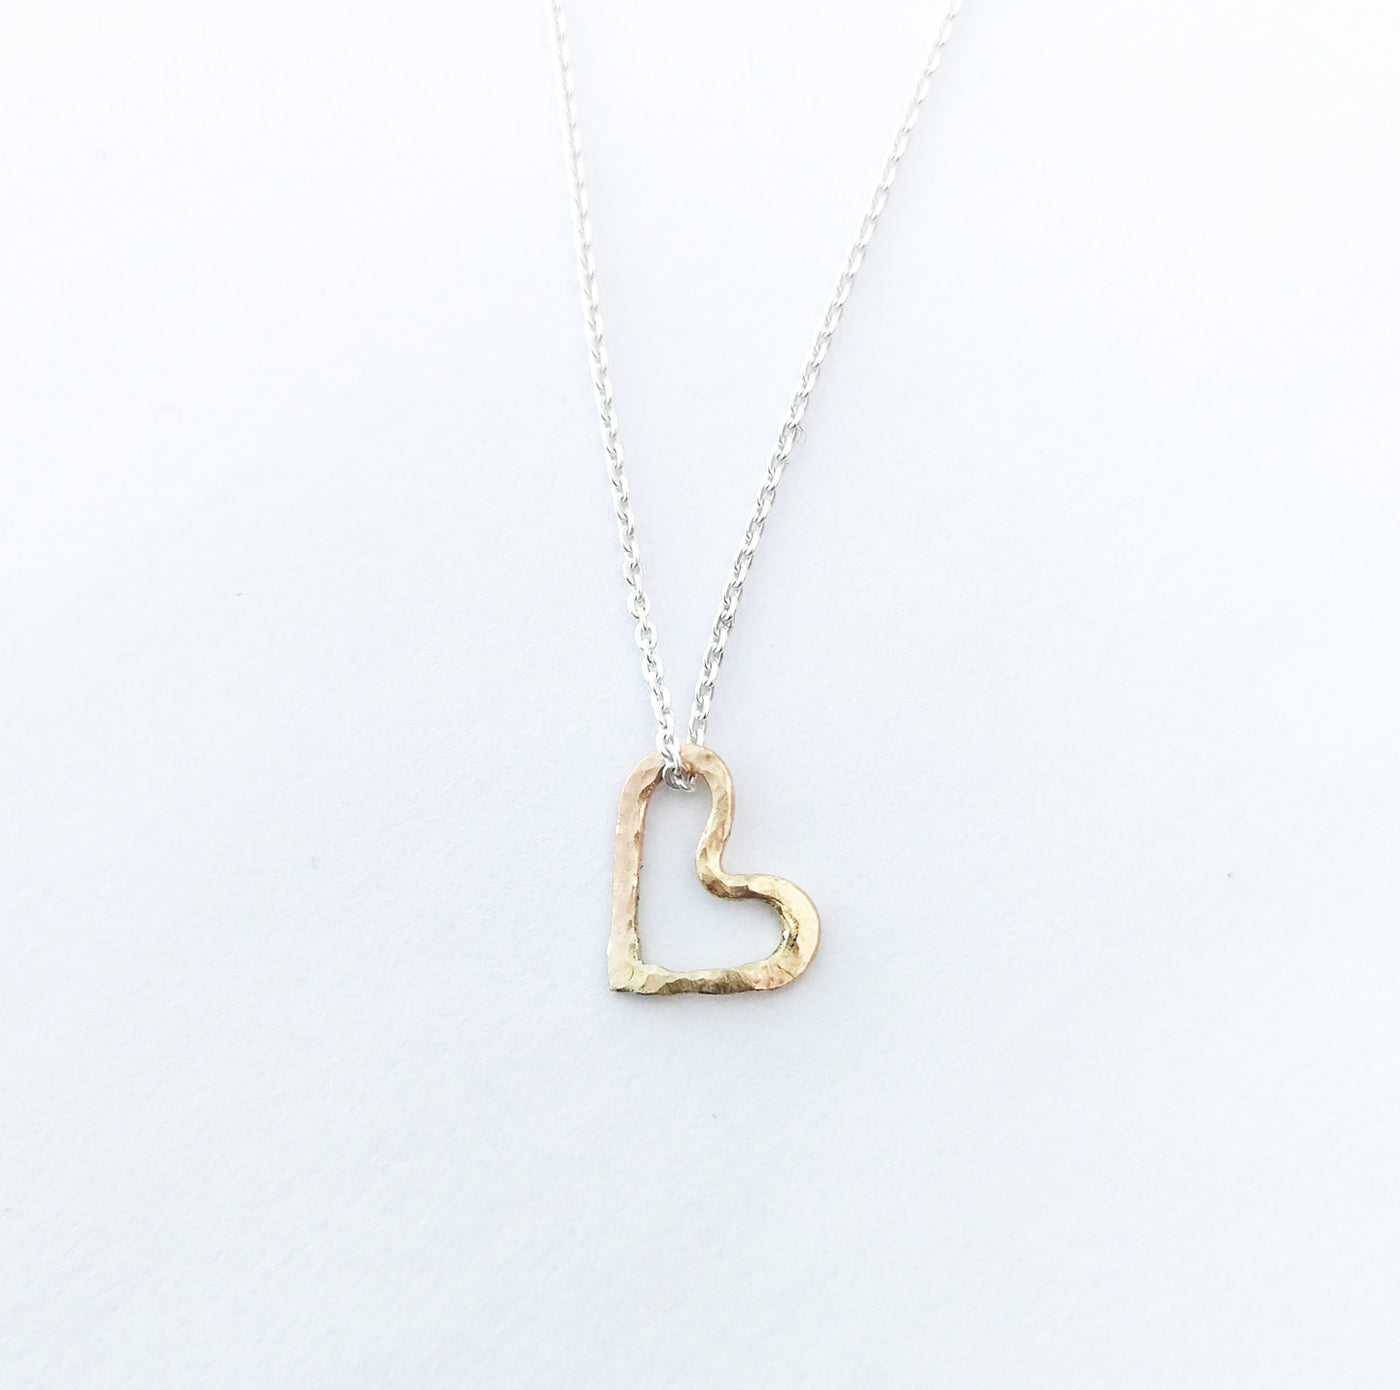 A close up image of the gold Openhearted Pendant